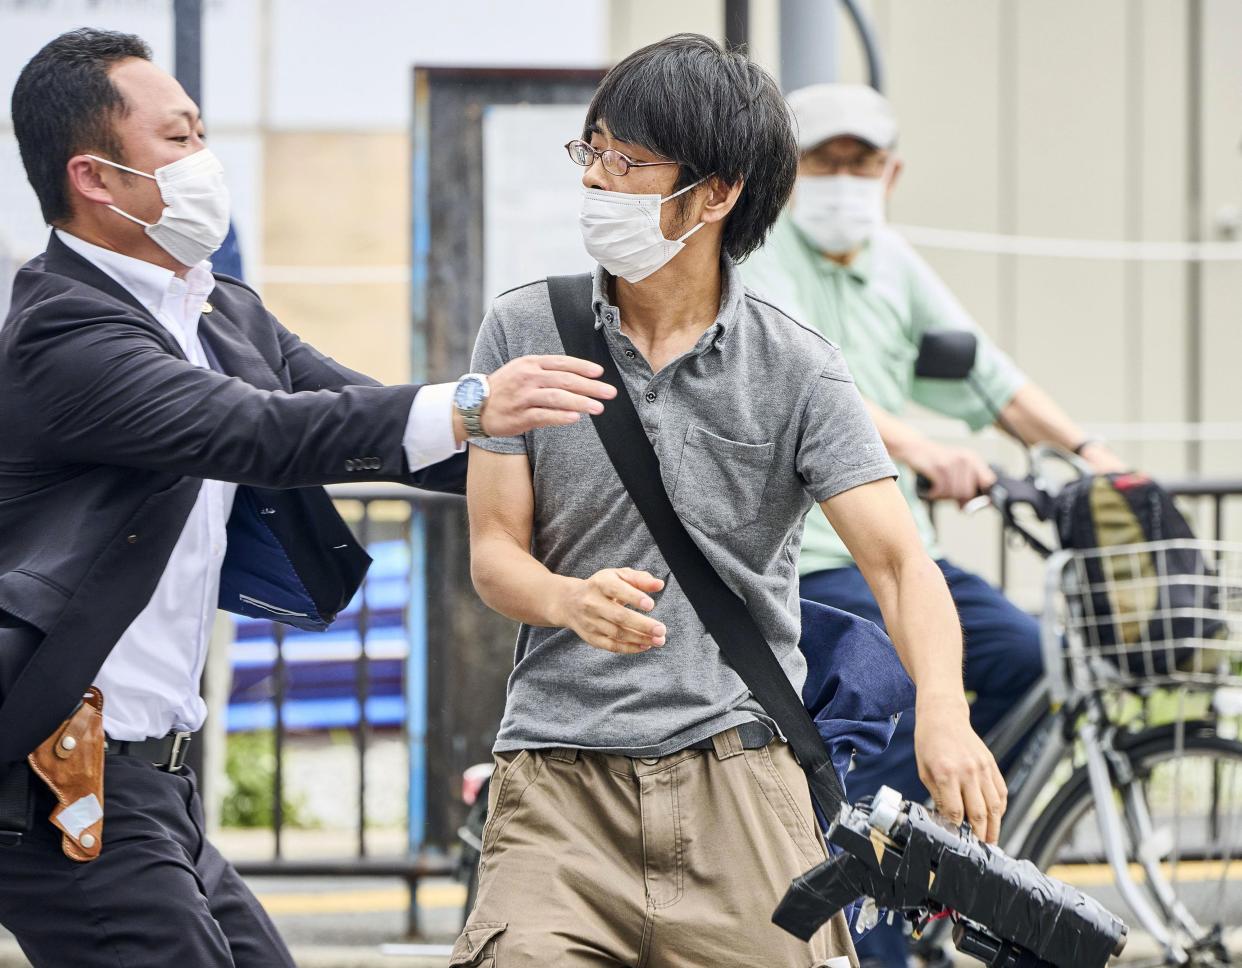 Tetsuya Yamagami, center, holding a weapon, is detained near the site of gunshots in Nara, western Japan Friday, July 8, 2022. Yamagami is accused of assassinating former Prime Minister Shinzo Abe by opening fire on at him from behind as he delivered a campaign speech. 